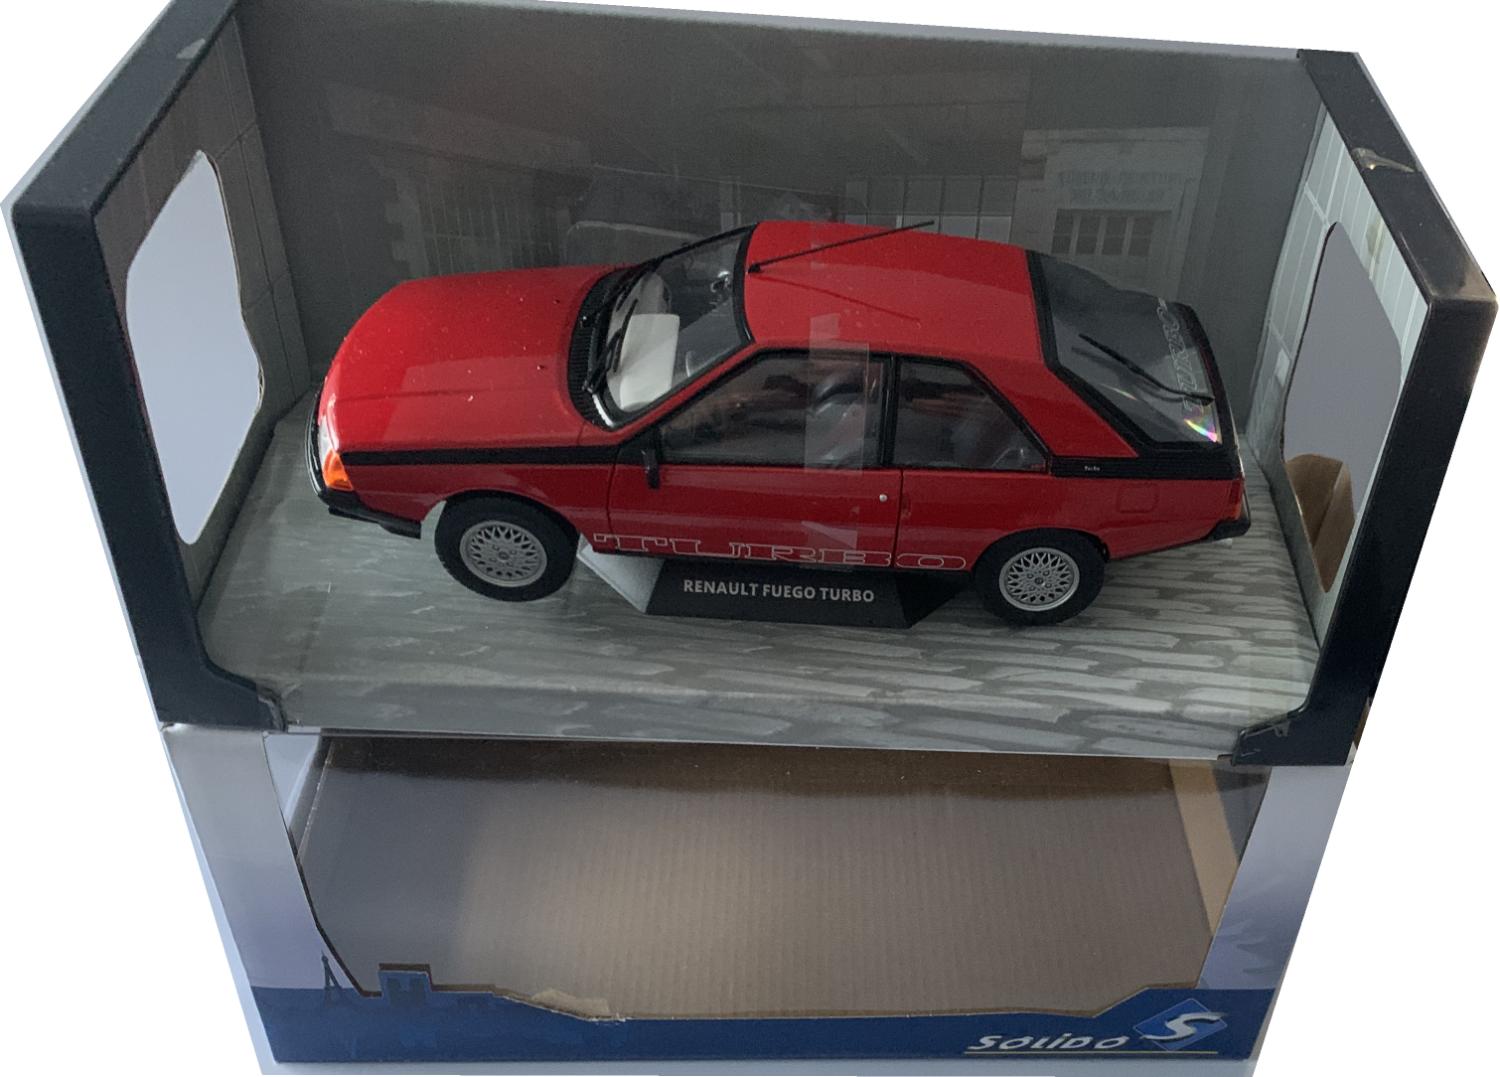 An excellent scale model of the Renault Fuego with high level of detail throughout, all authentically recreated.  Model is presented in a window display box.  The car is approx. 24 cm long and the presentation box is 31 cm long